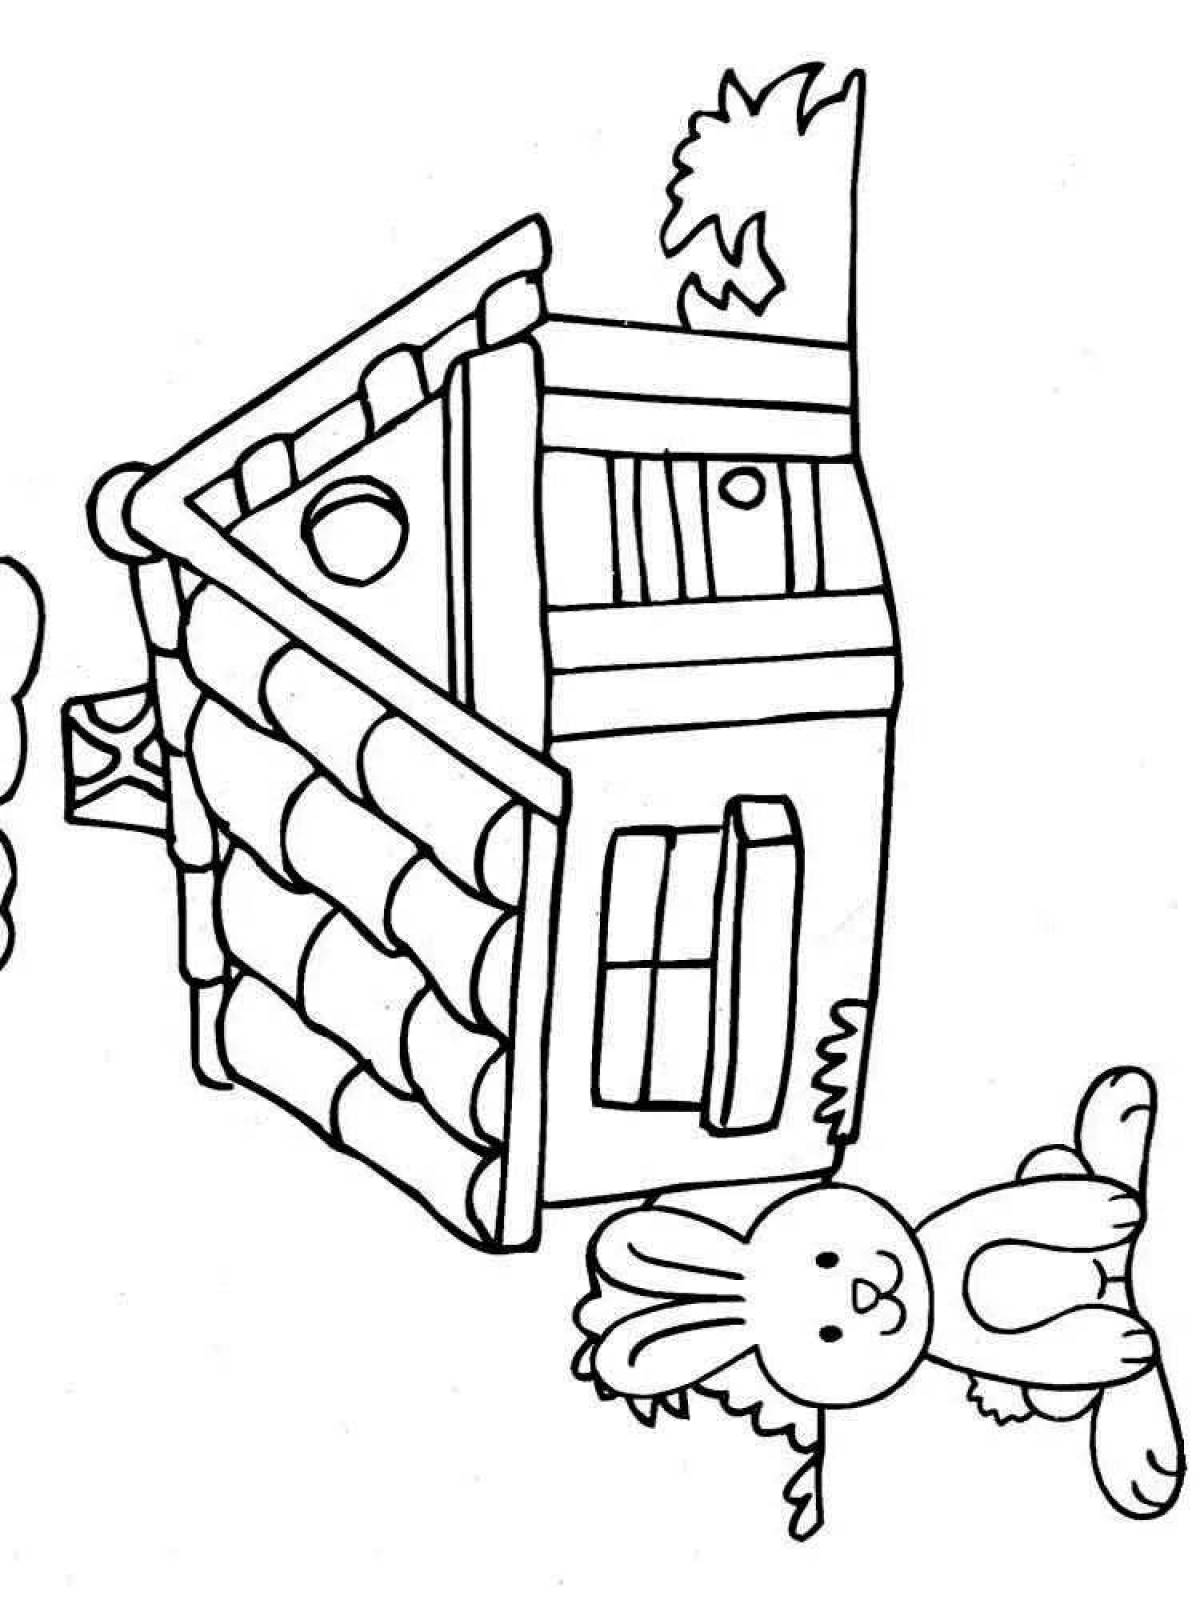 Glowing coloring page 5 6